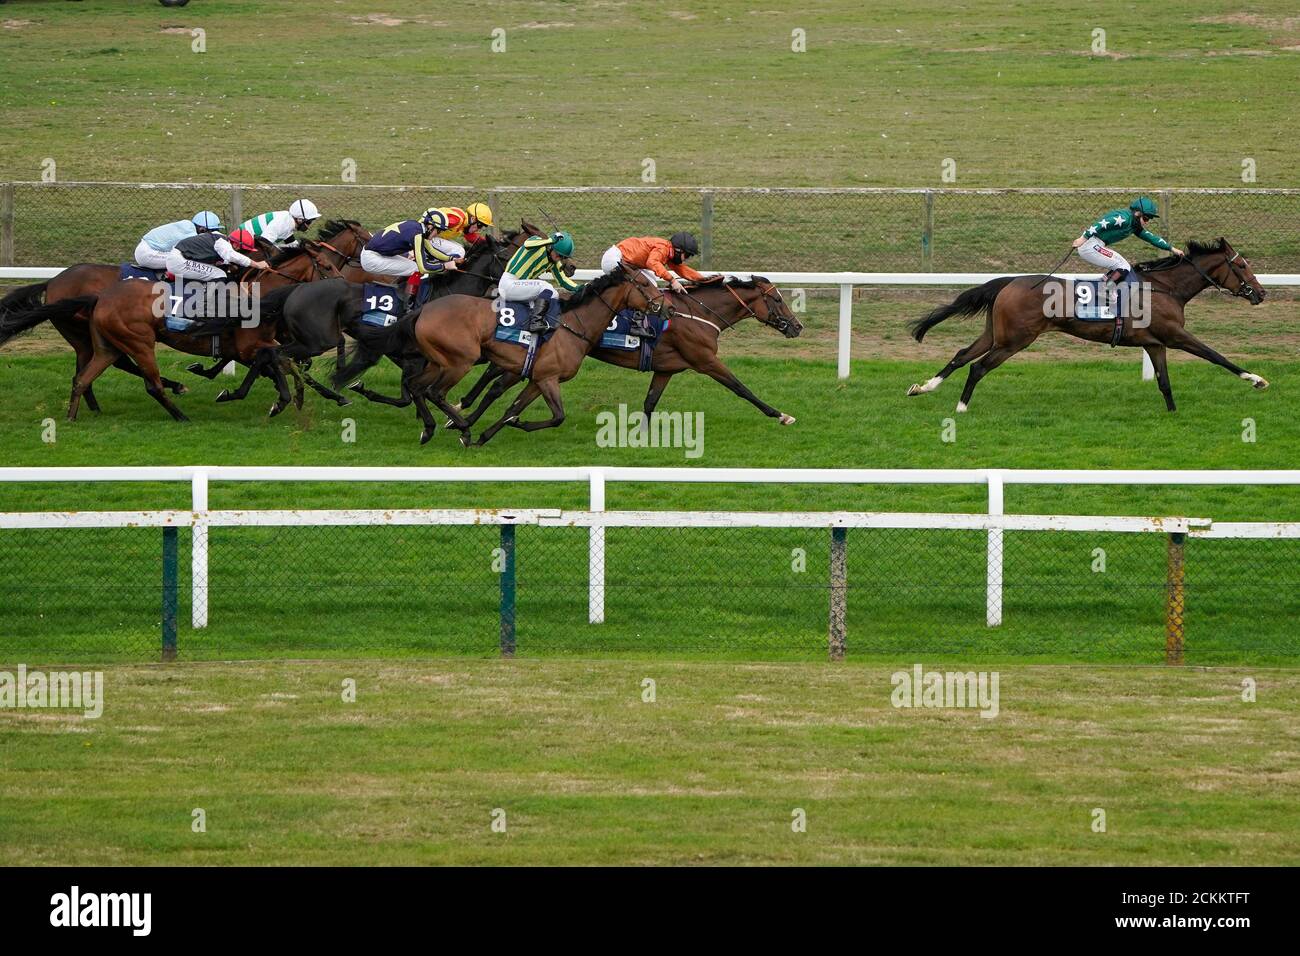 Hollie Doyle riding Majestic Noor (right, green) win The EBF Stallions John Musker Fillies' Stakes at Great Yarmouth Racecourse. Stock Photo